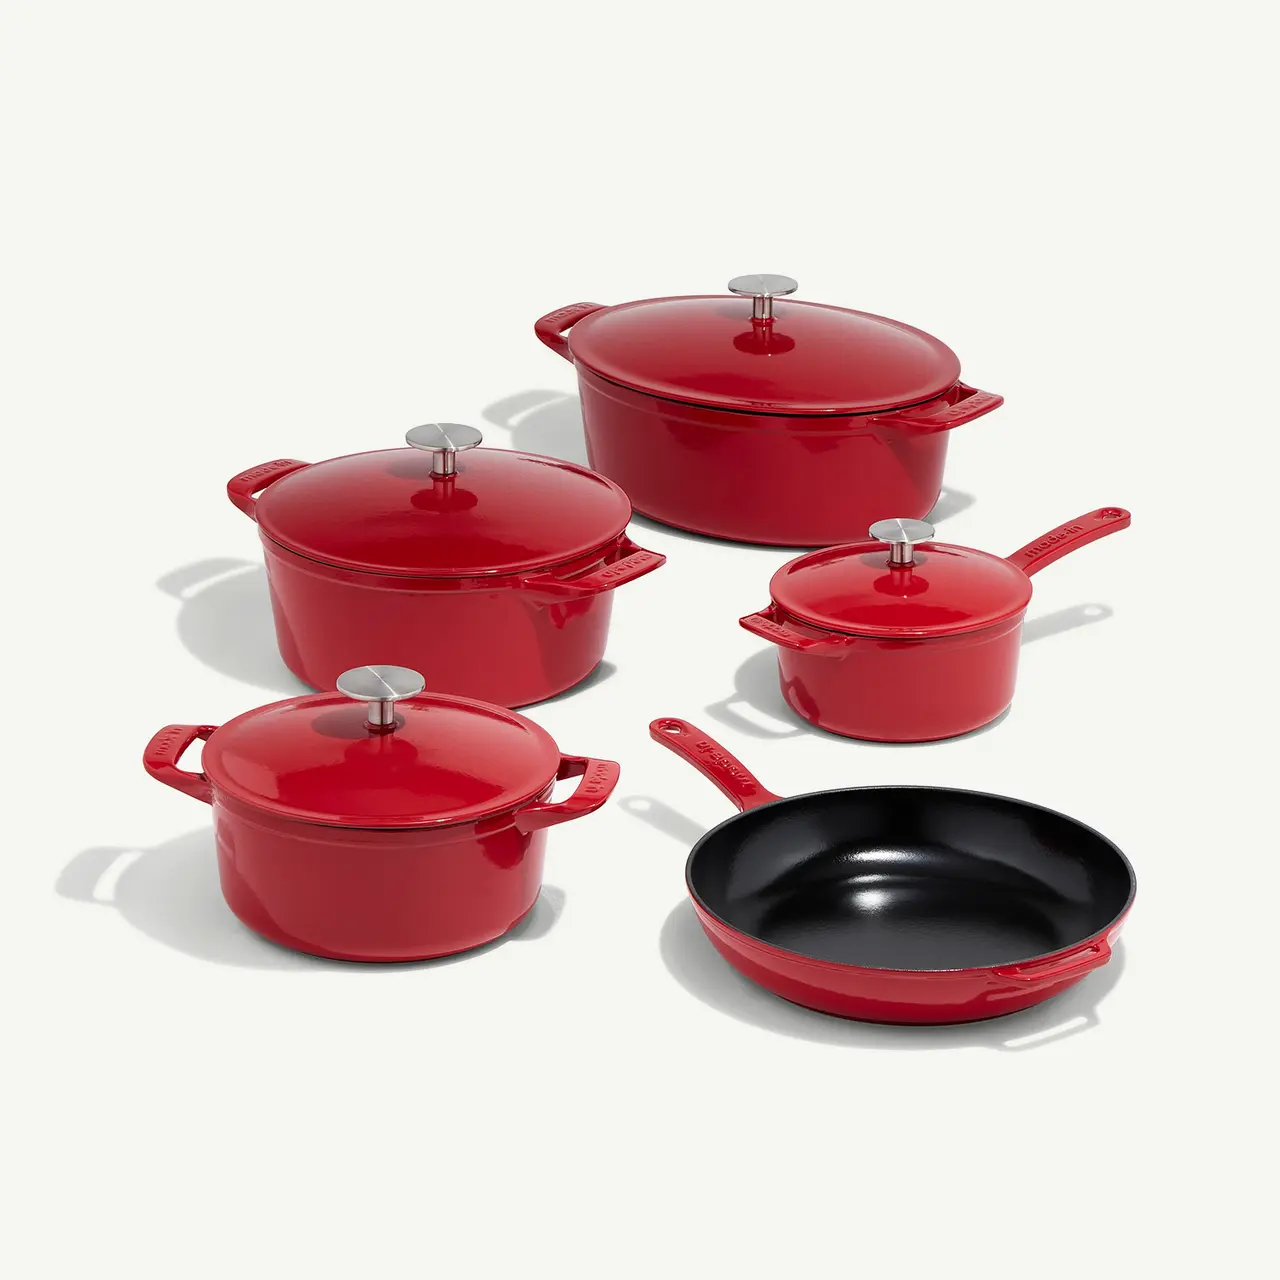 A collection of red cookware includes pots with lids and a frying pan, all with matching handles.